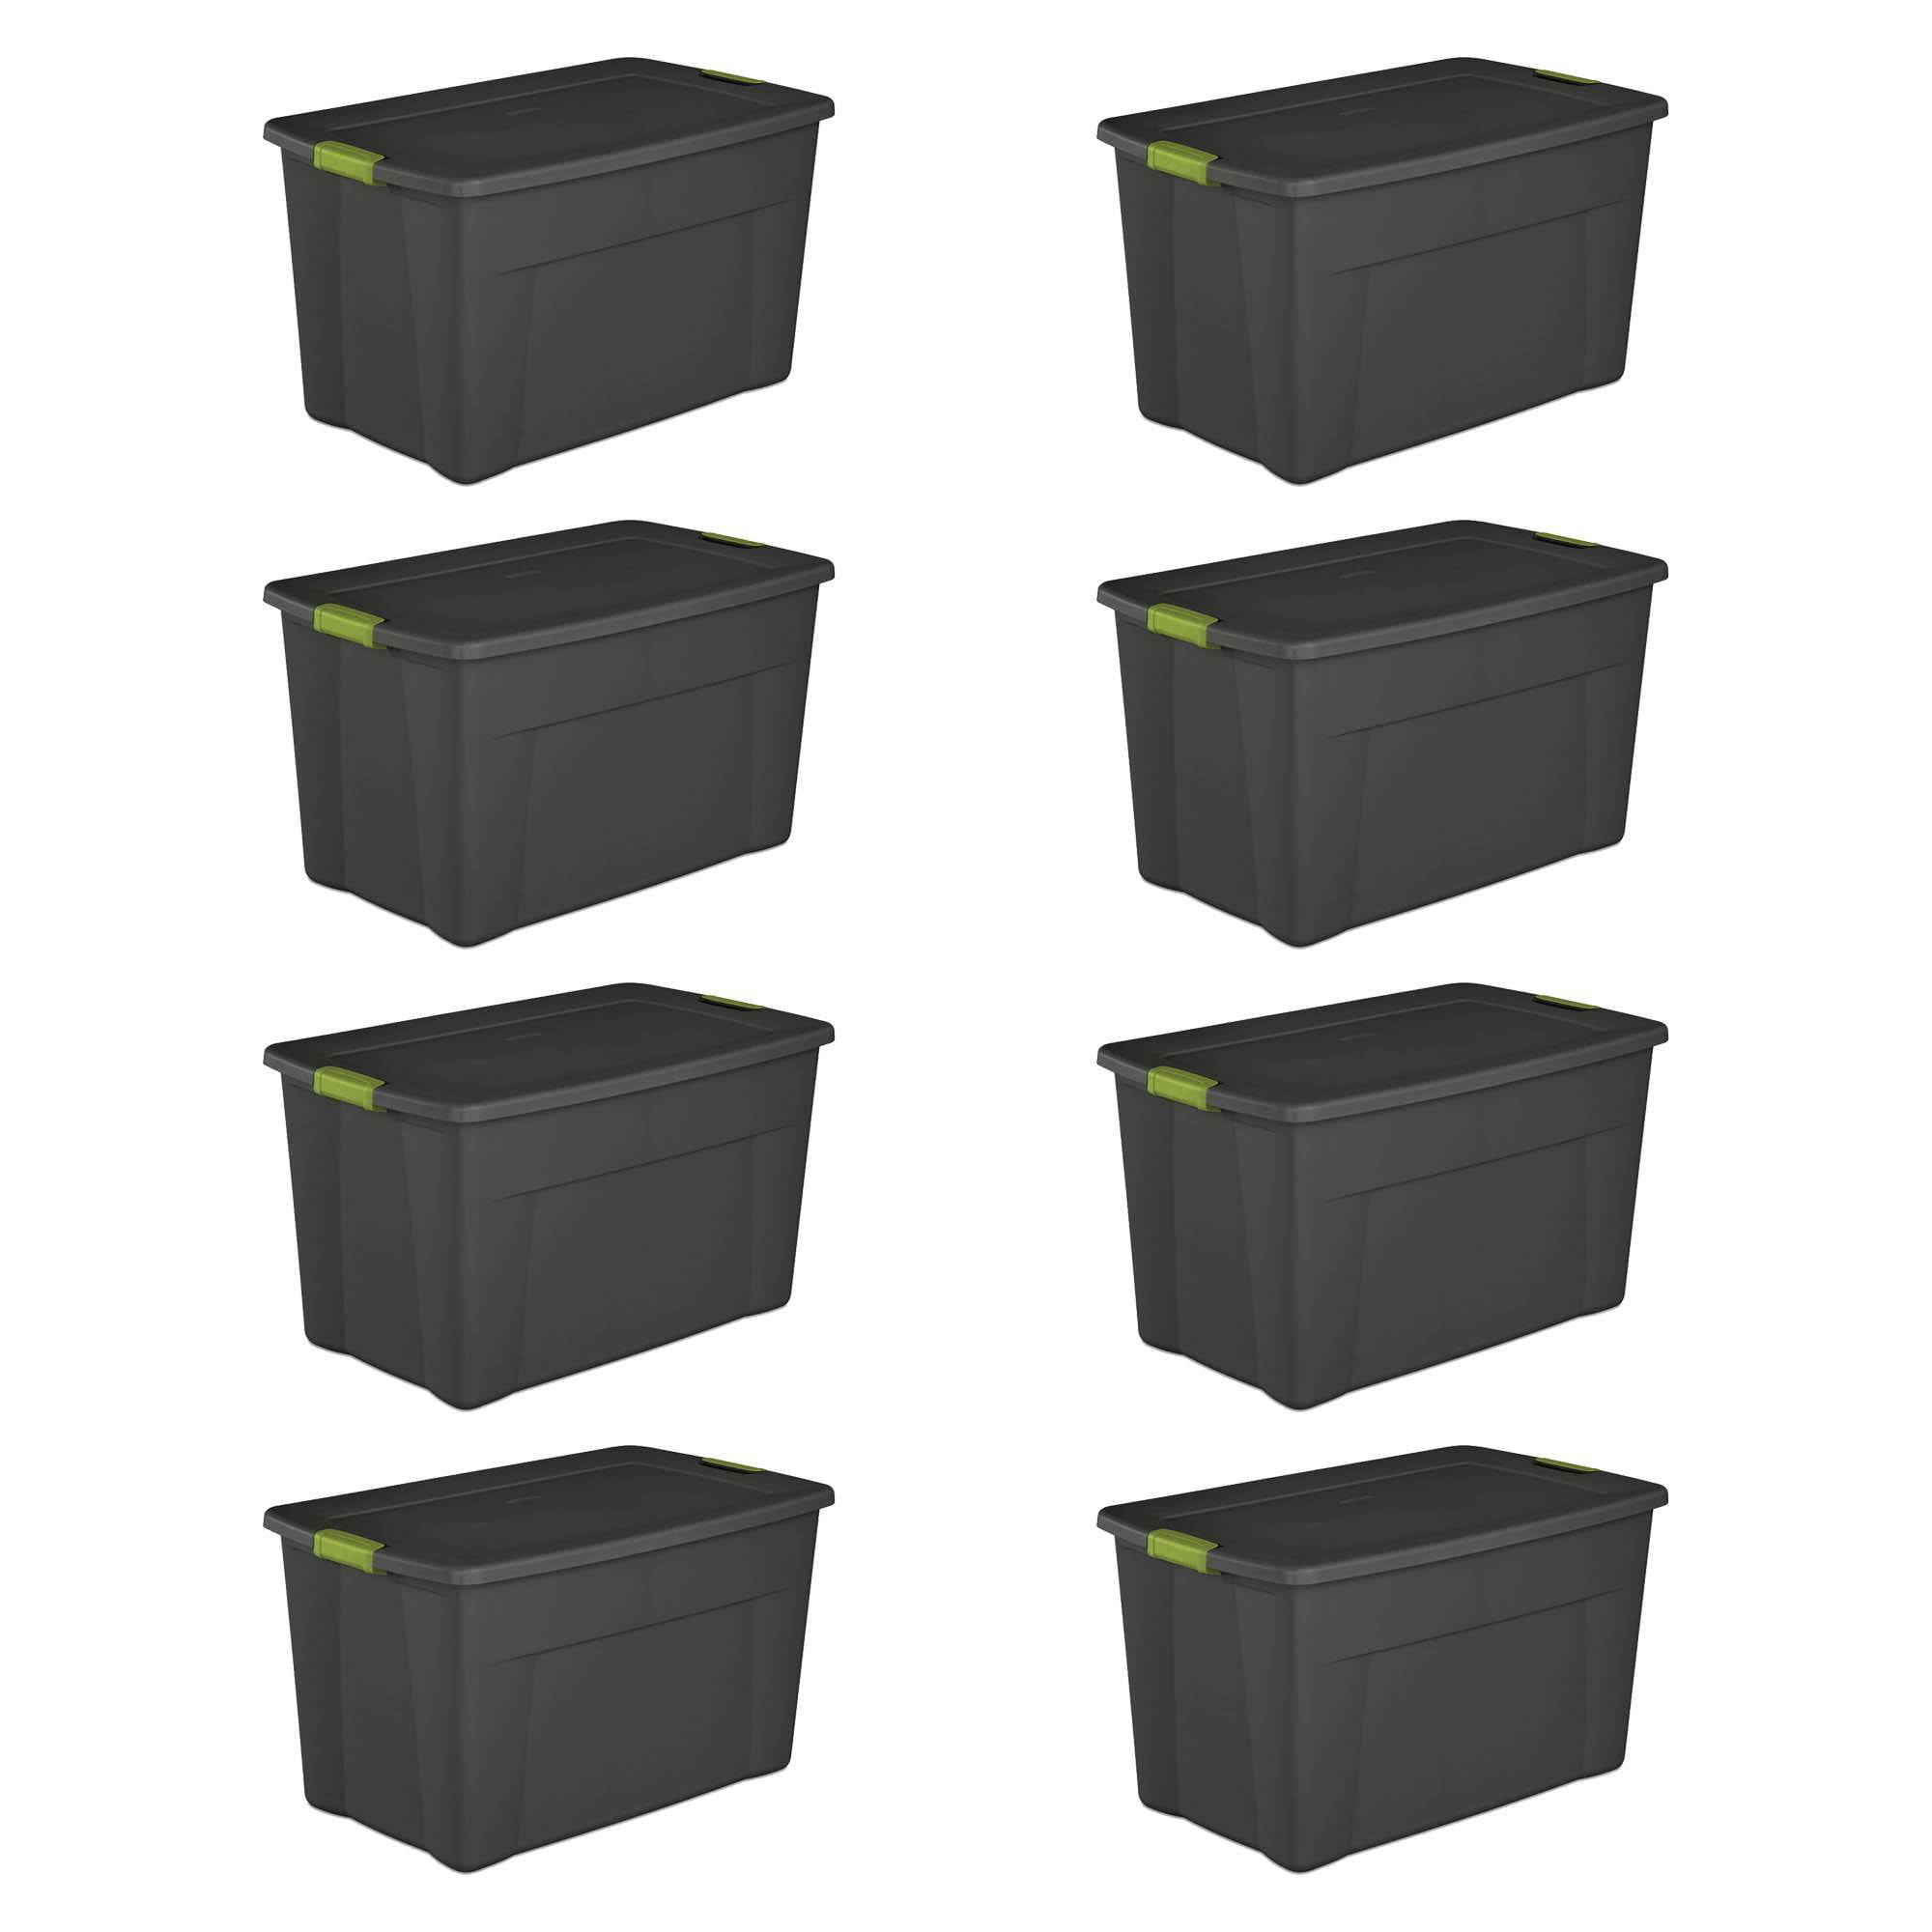 CleverMade CleverCrates Pro-Grade 46 Liter Collapsible Storage Bin 